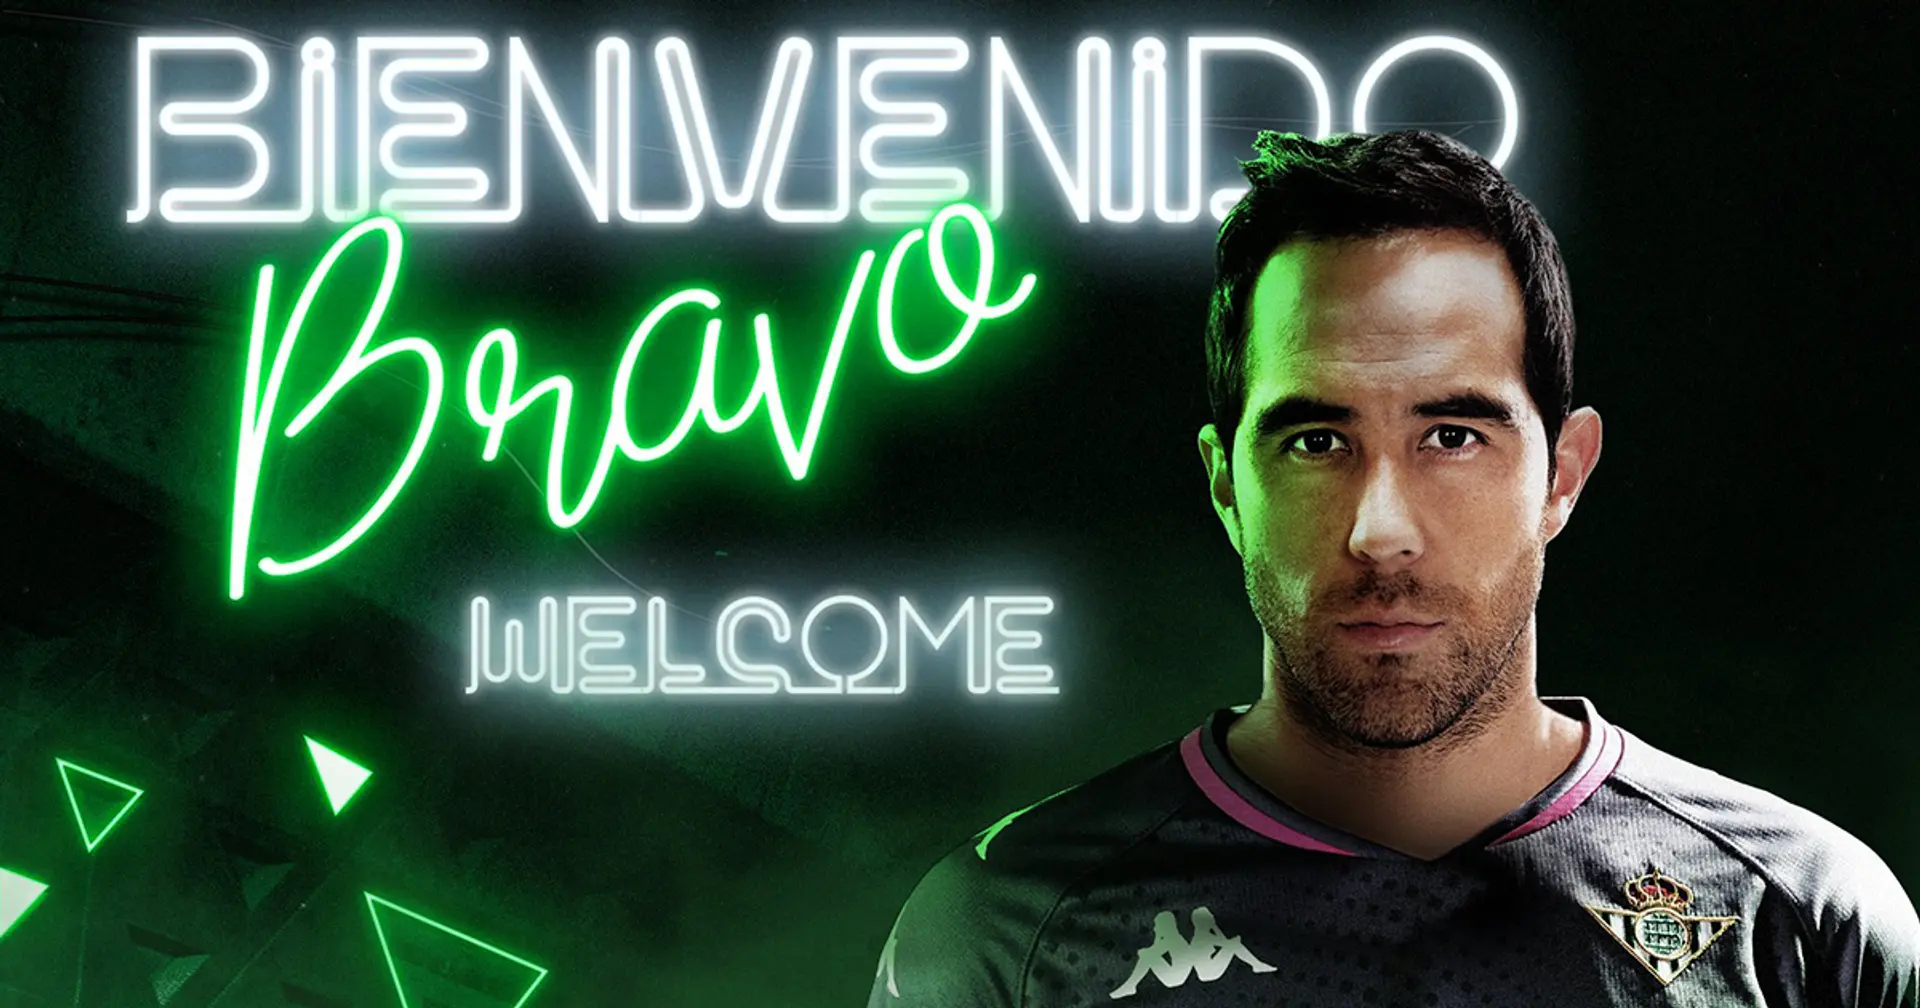 Claudio Bravo signs for Betis as department of ex-Barca goalkeepers steadily growing in La Liga